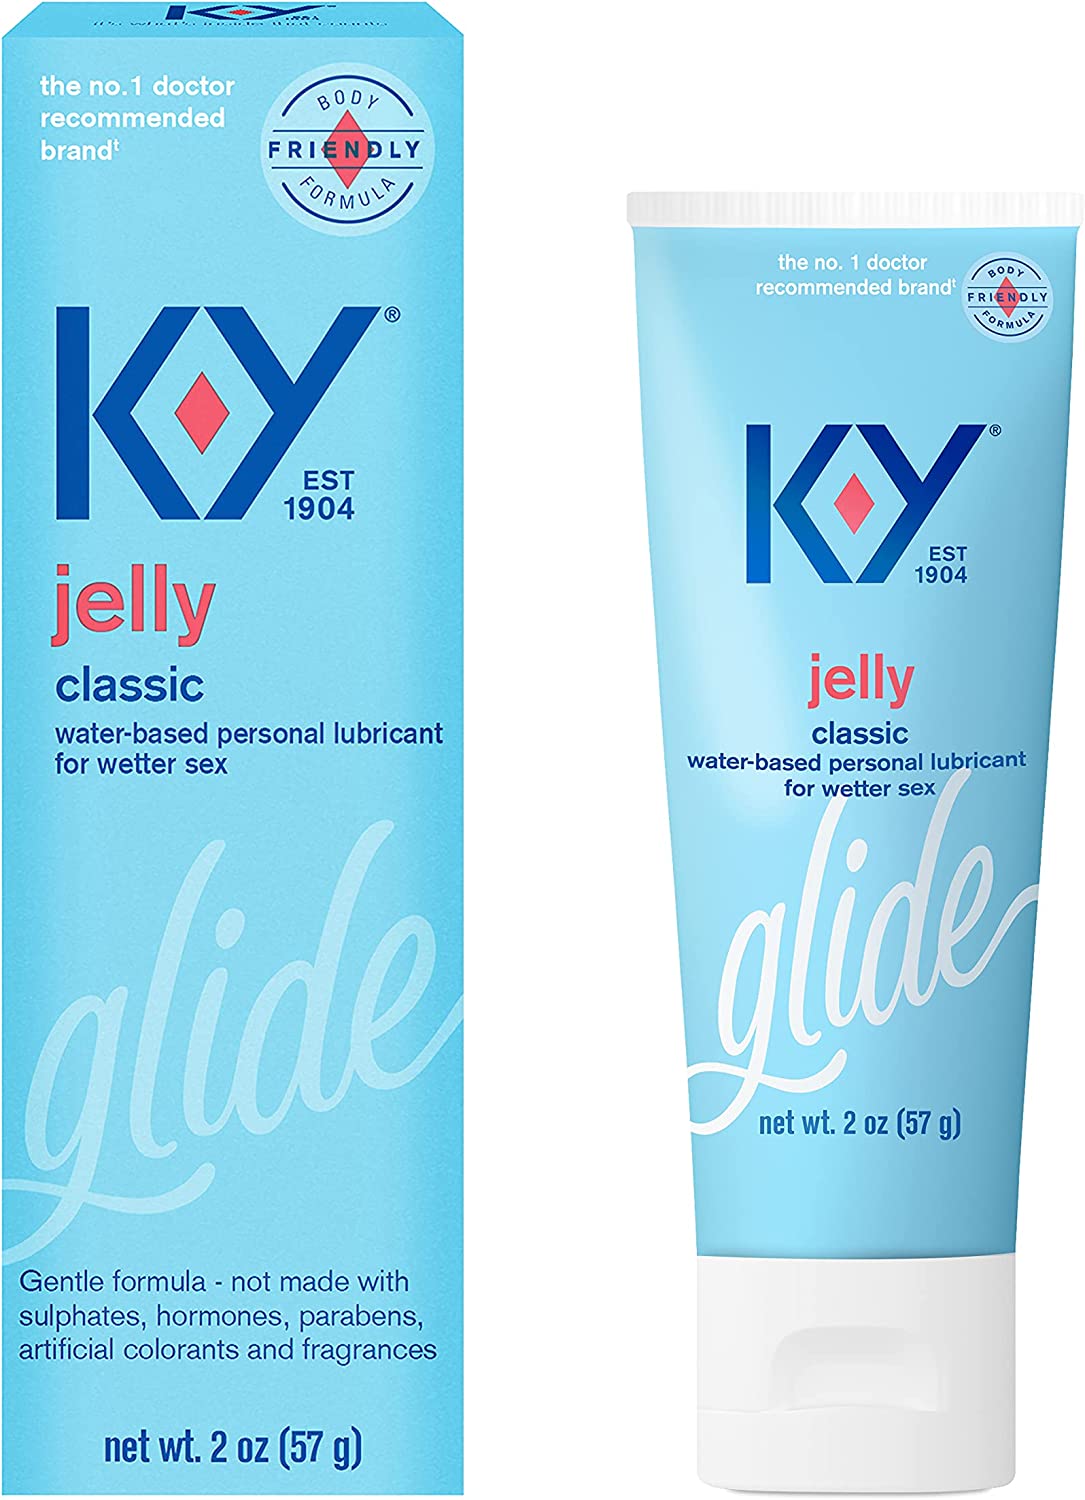 KY JELLY CLASSIC LUBRICANT